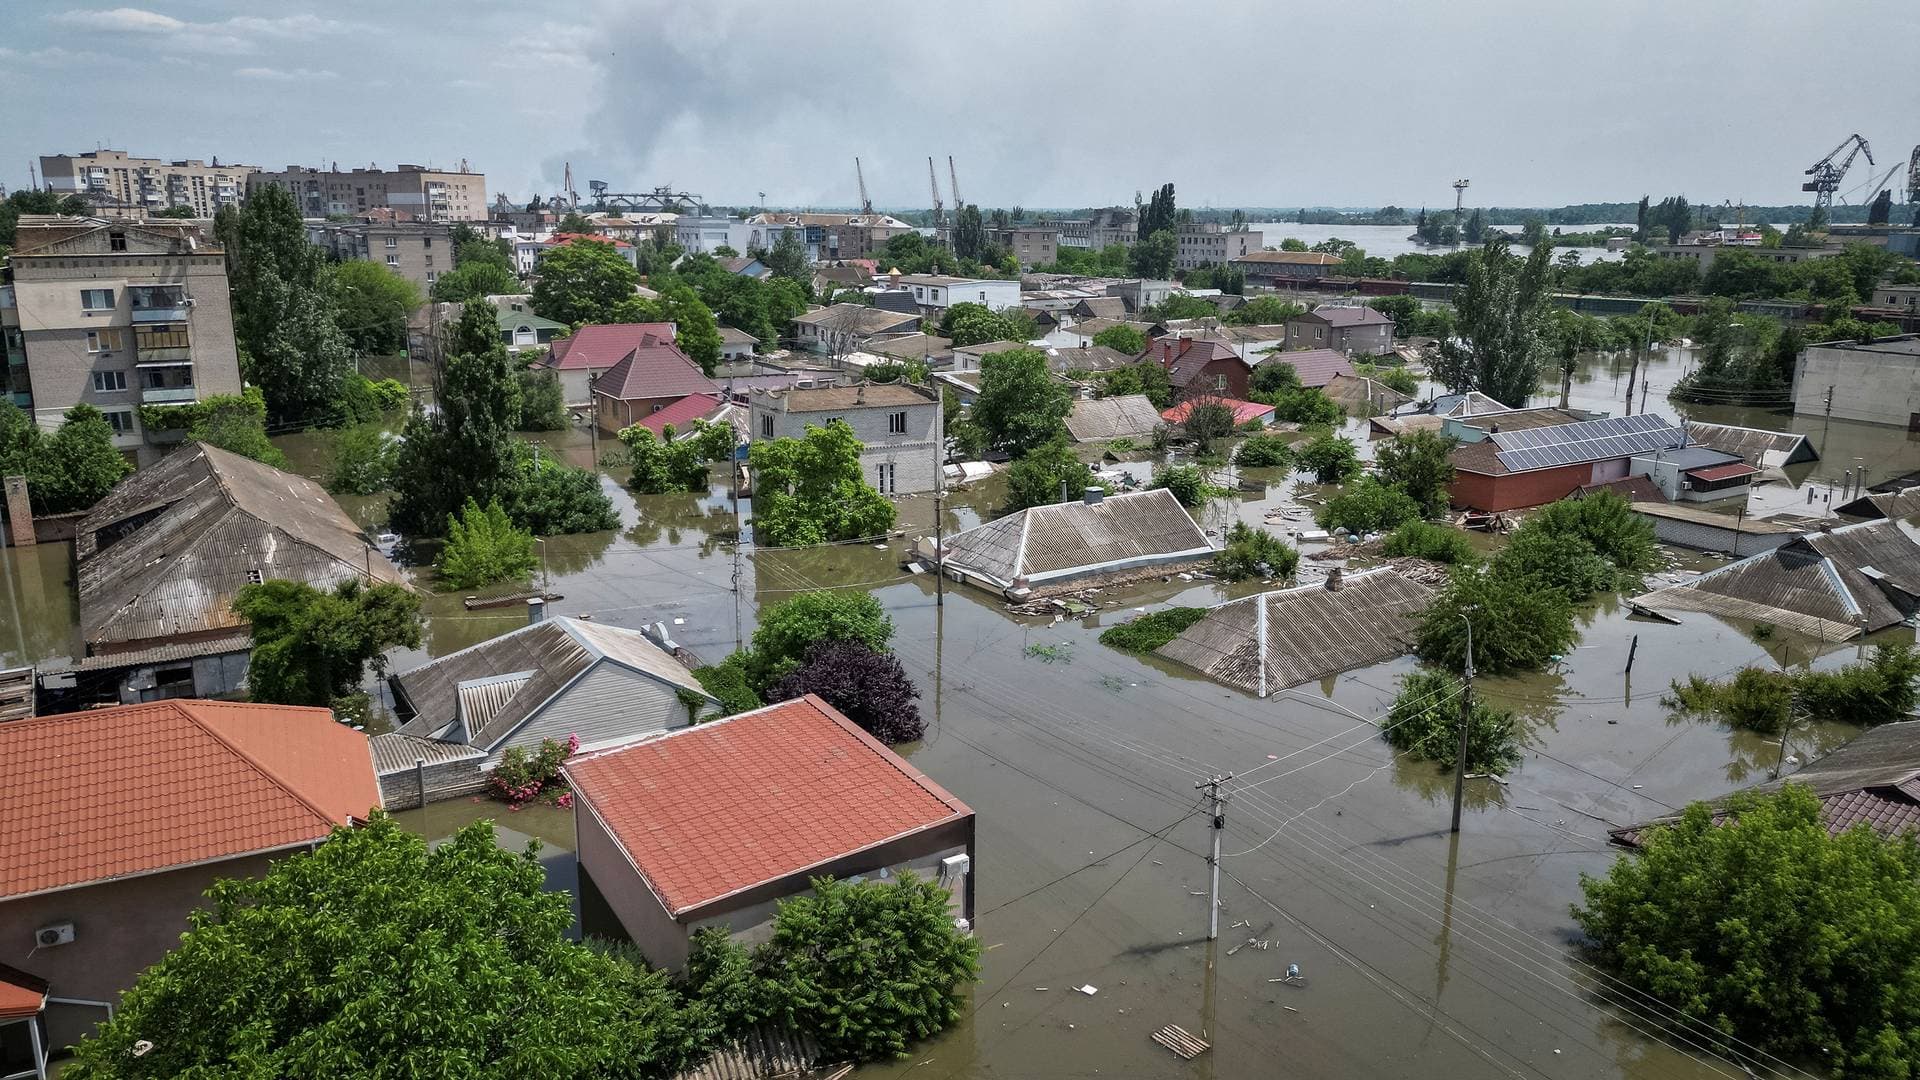 An aerial view of flooding in Kherson after the Nova Kakhovka dam breach